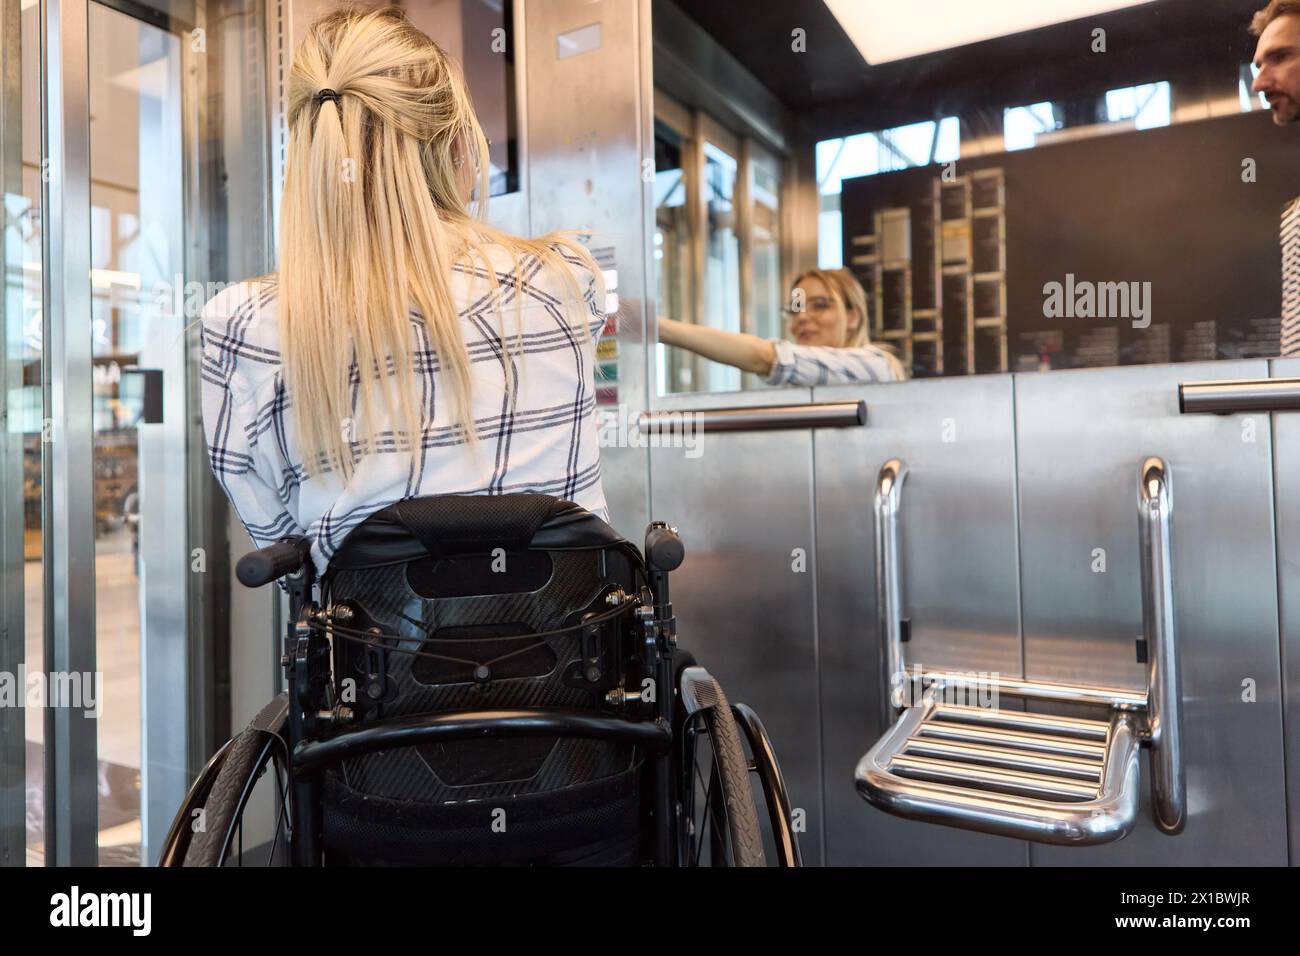 Back view of a person in a wheelchair at a service counter interacting with an employee, showcasing inclusion and accessibility. Stock Photo